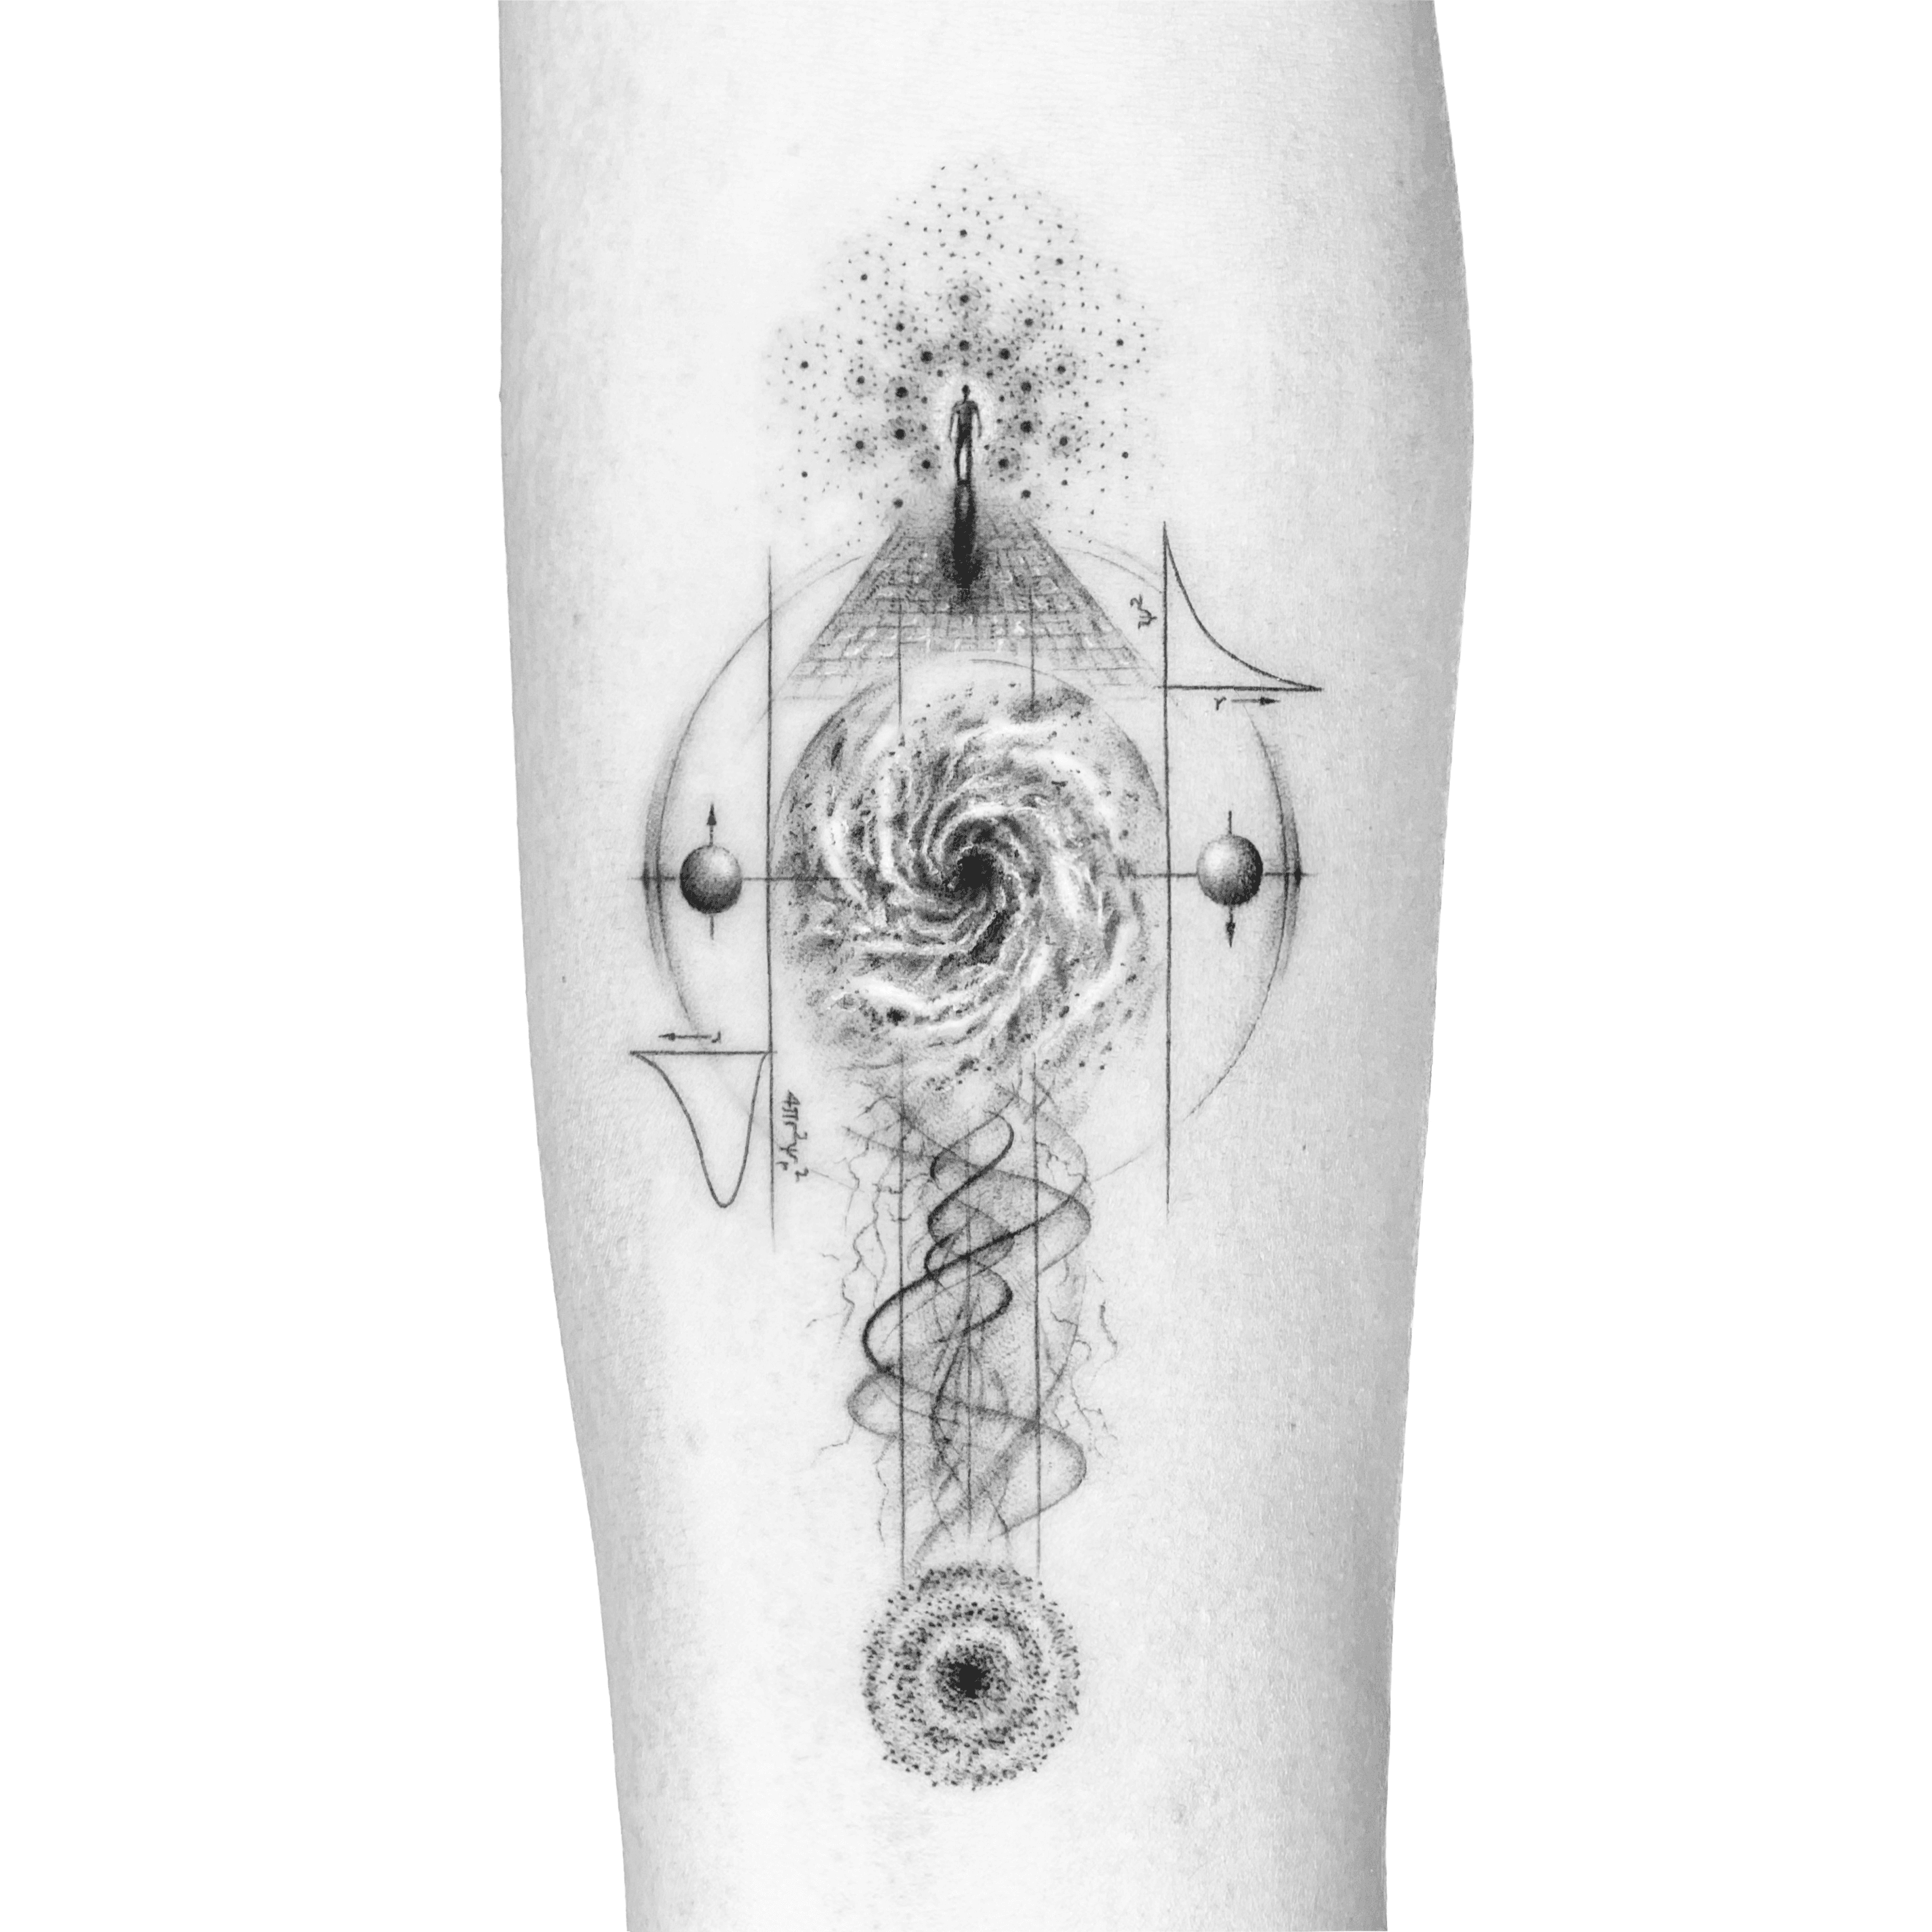  done aaedesign   Maternal twin   Quantum entanglement    No  matter how far from each other for two or  in 2023  Science tattoos  Cosmic tattoo Physics tattoos